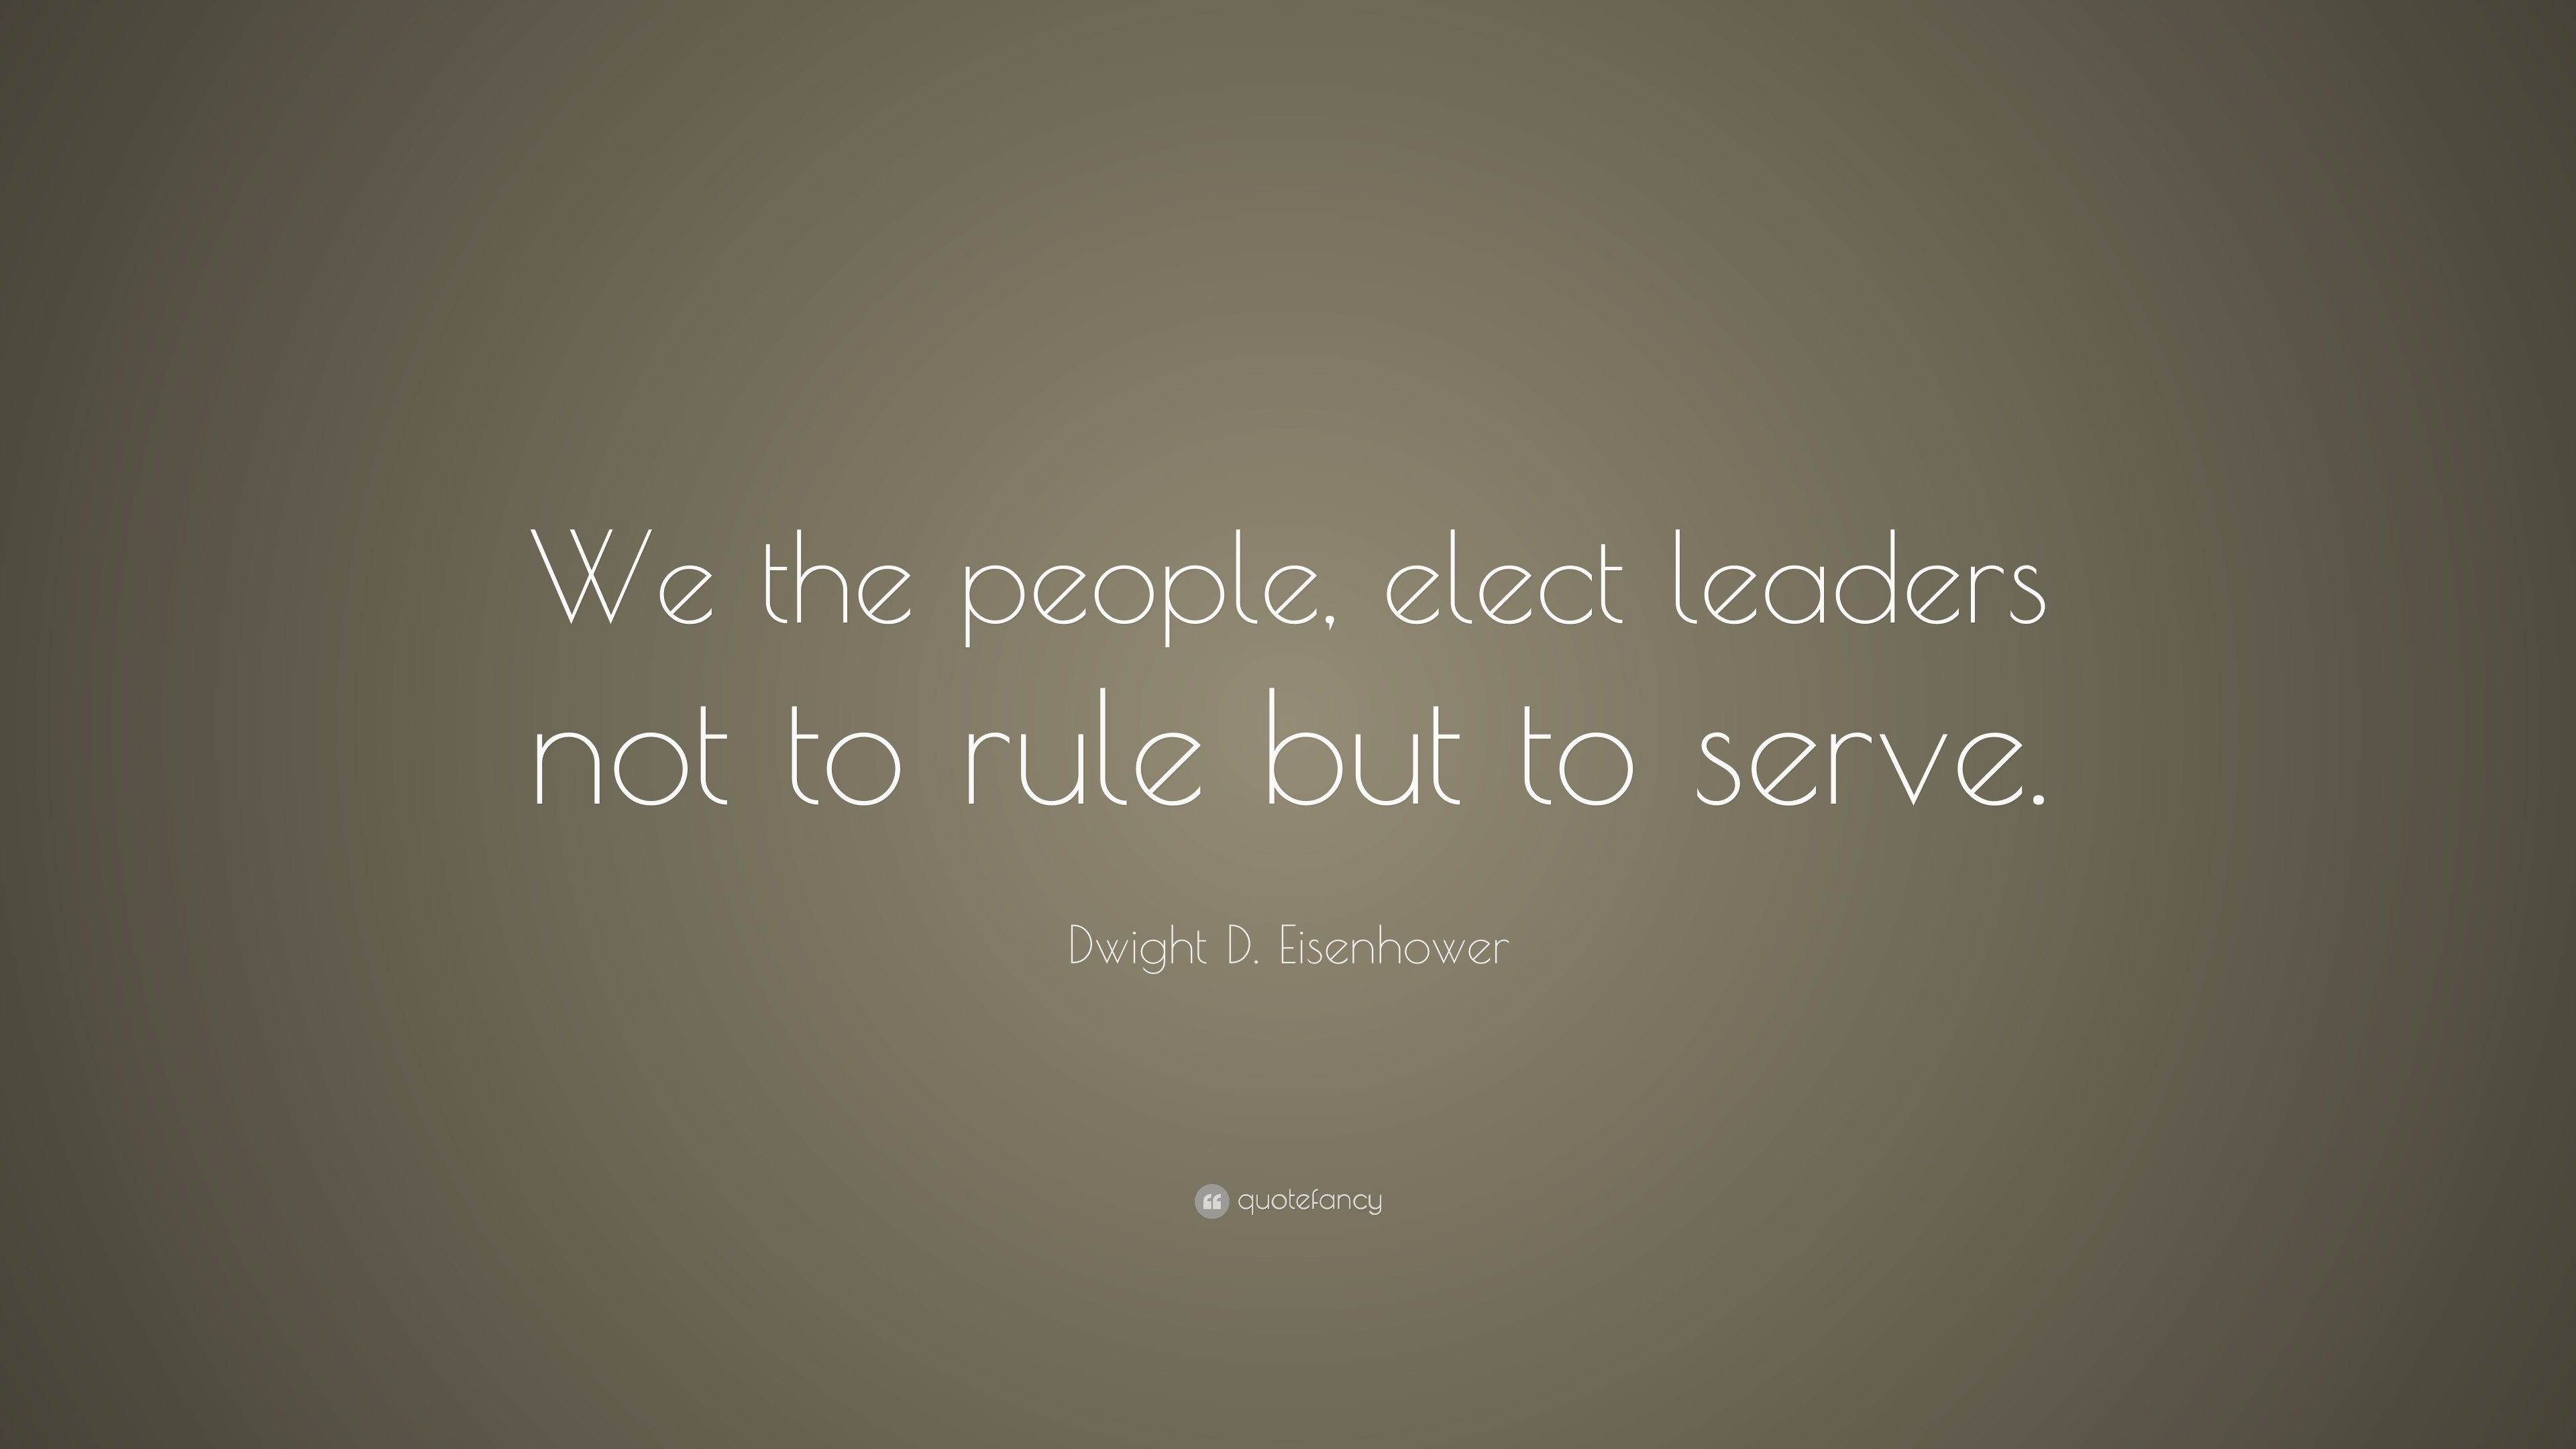 3840x2160 Dwight D. Eisenhower Quote: “We the people, elect leaders not to rule